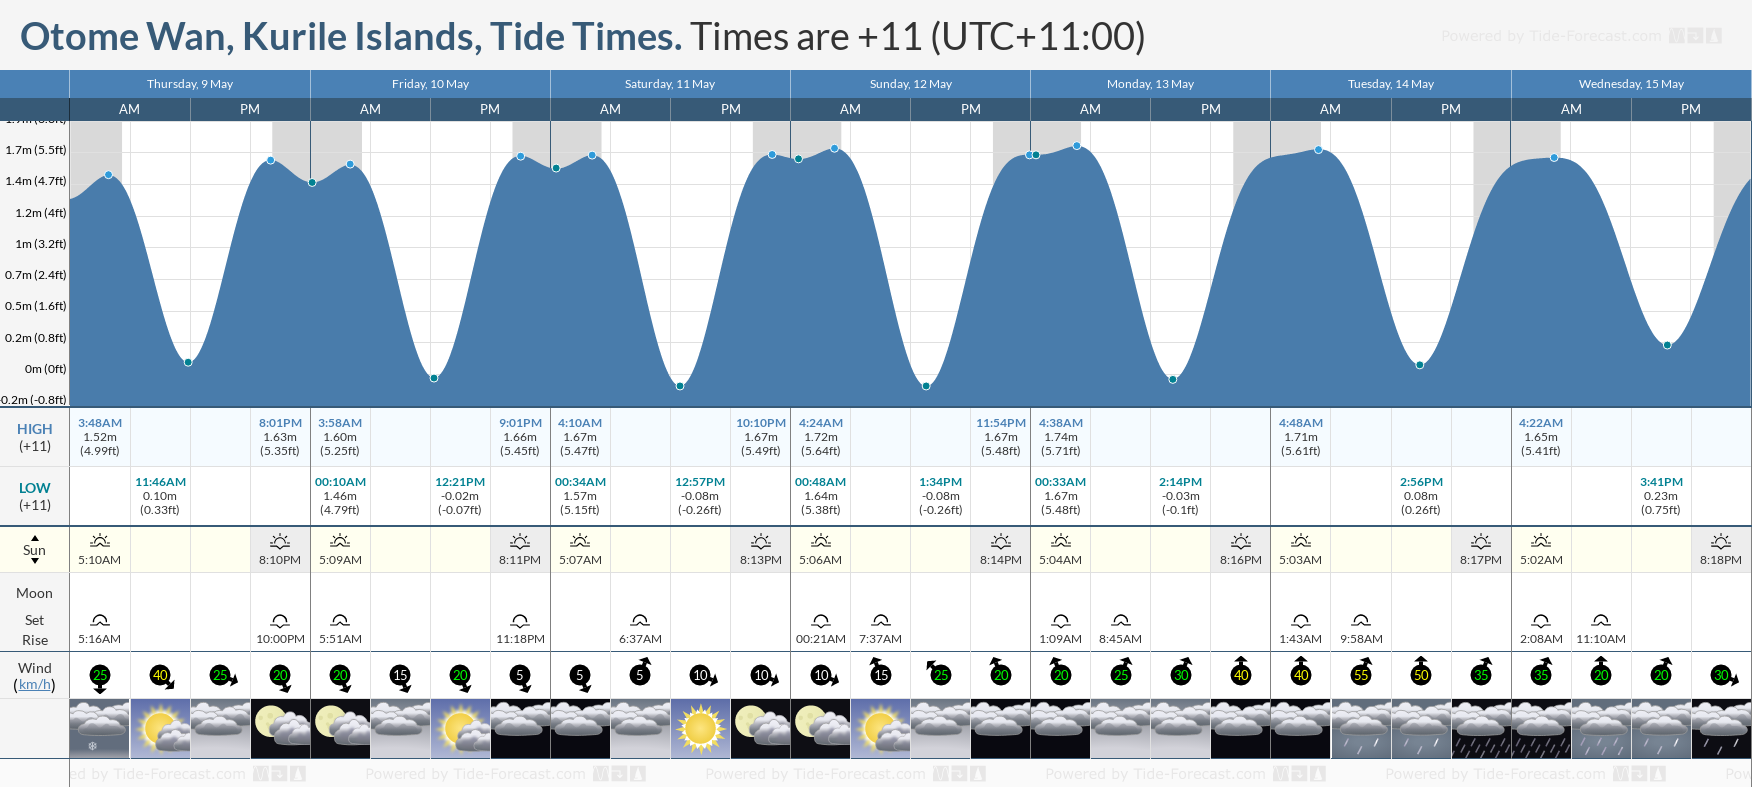 Otome Wan, Kurile Islands Tide Chart including high and low tide tide times for the next 7 days